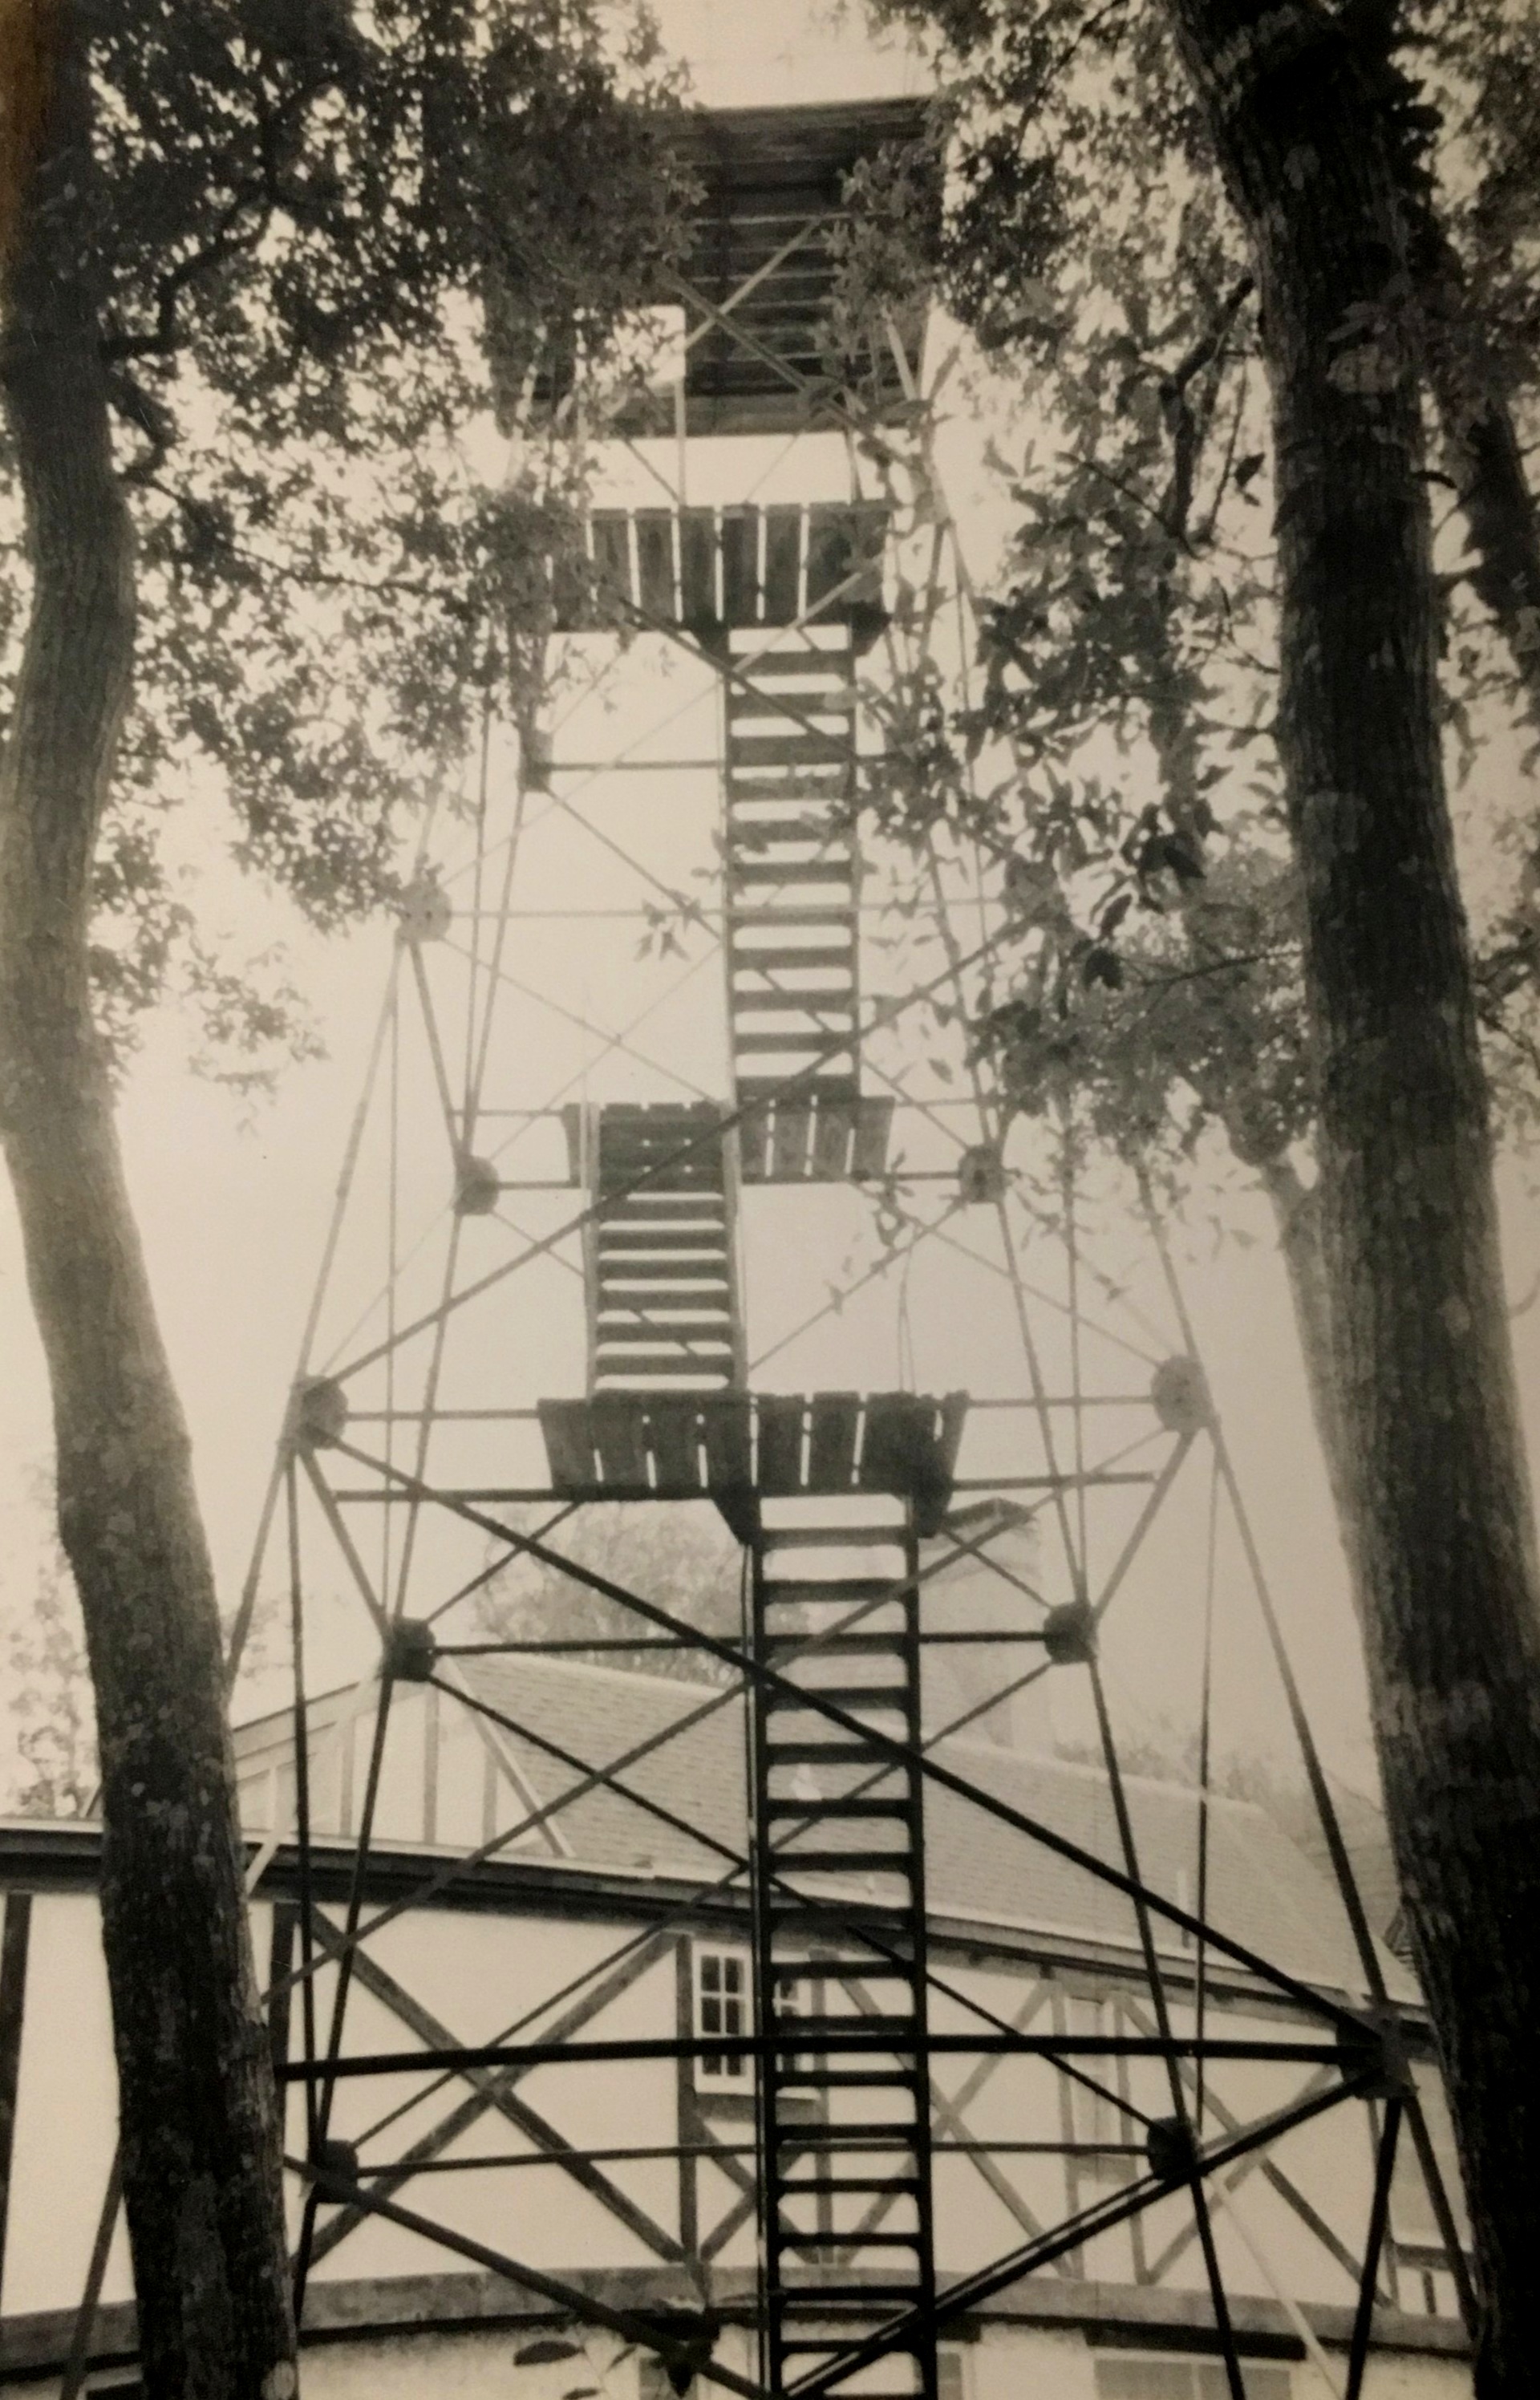  Observation tower on the property.  Image courtesy of the Betz family. All Rights Reserved – Do not reproduce. 